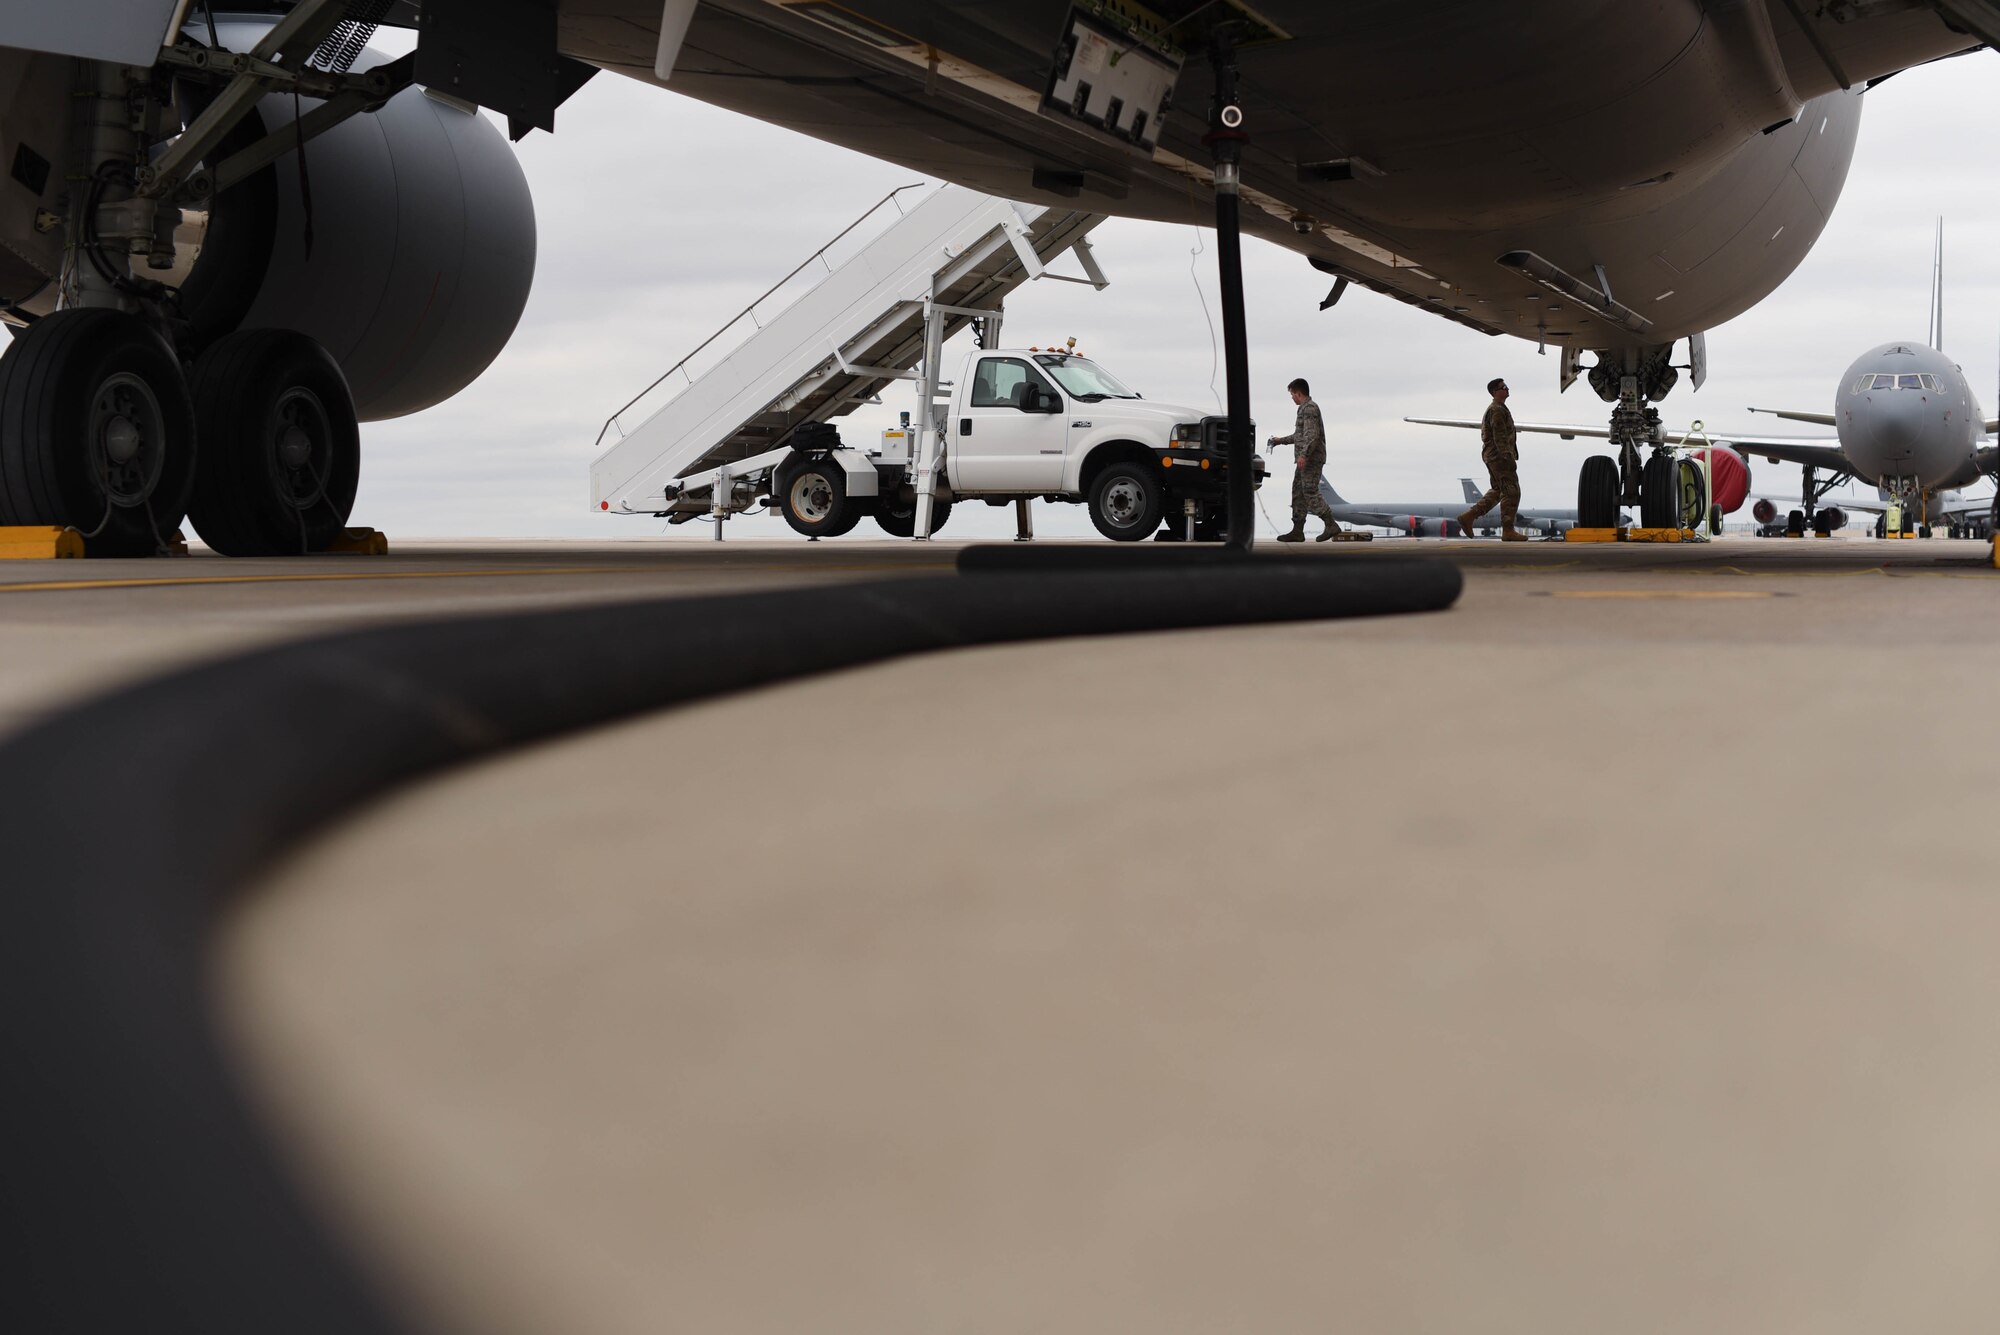 A fuel hose transfers Jet A fuel to a KC-46 Pegasus March 24, 2020, at McConnell Air Force Base, Kansas. Fuel trucks are capable of delivering 50,000 pounds of fuel at a rate of 2,000 pounds per minute. Additionally, petroleum, oil and lubricants are responsible for conducting fuel sampling quality control analysis to verify Jet A fuel is free of contaminants. (U.S. Air Force photo by Senior Airman Alexi Bosarge)